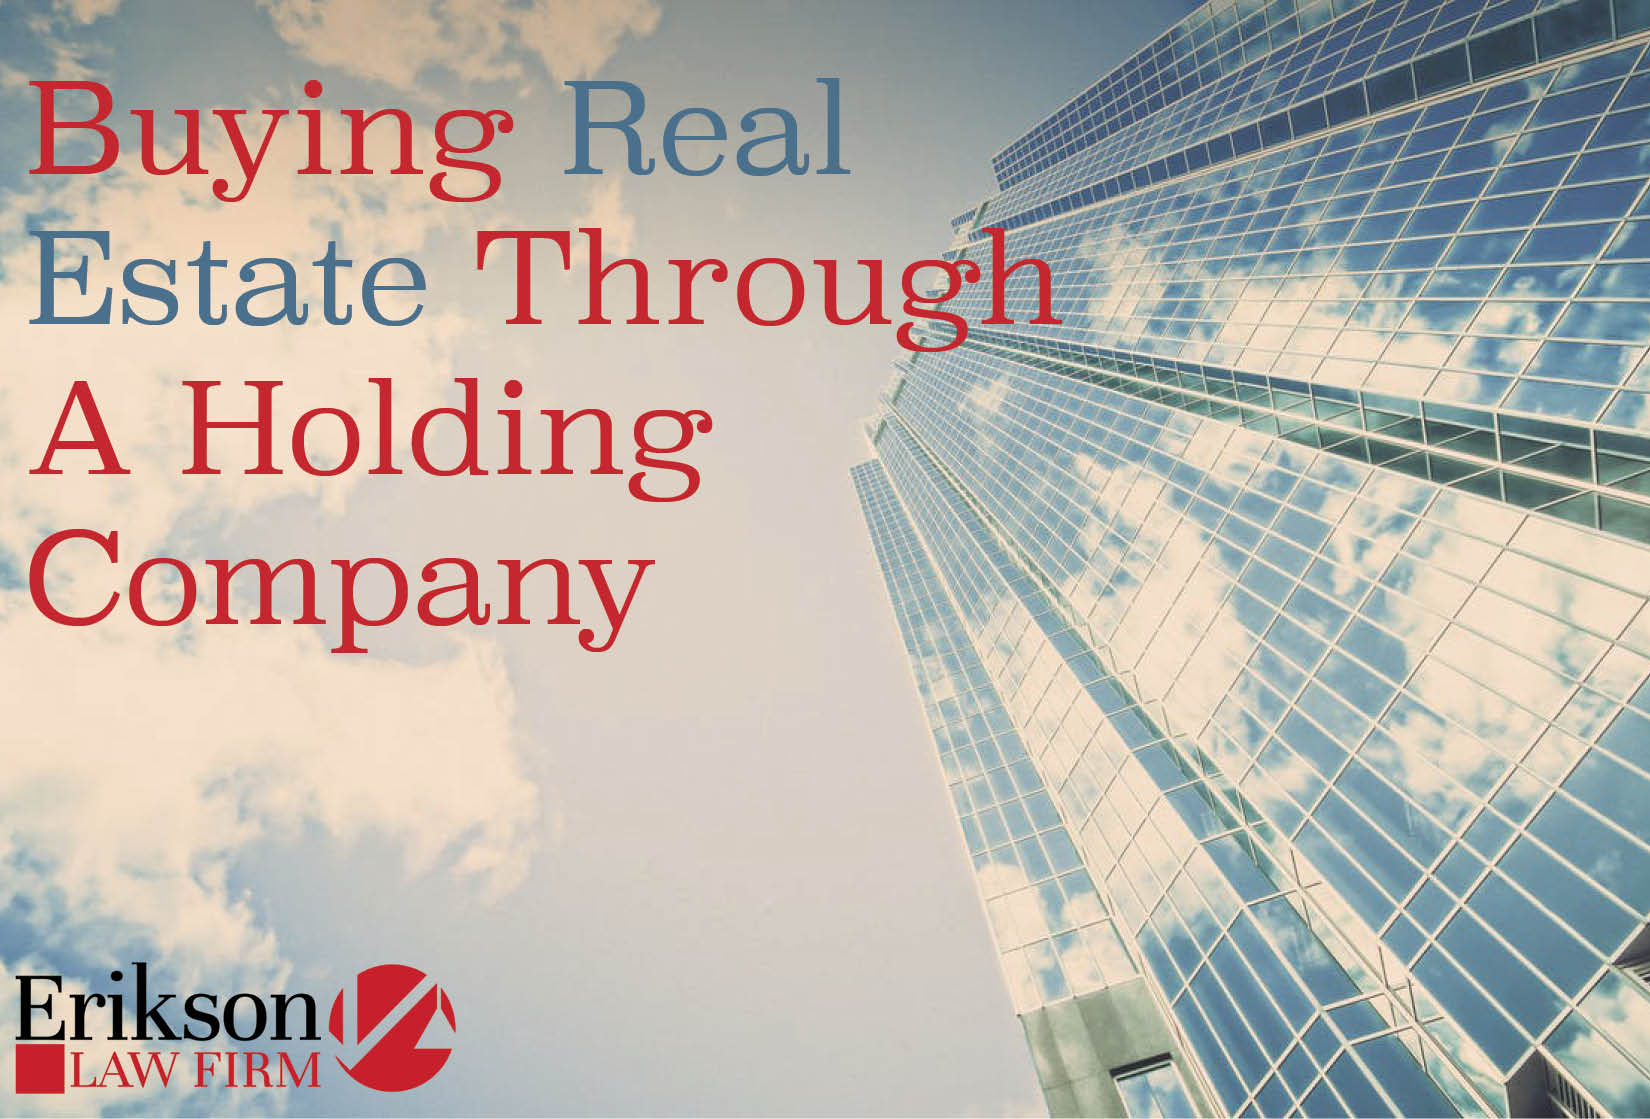 Buying Real Estate Through a Holding Company Erikson Law